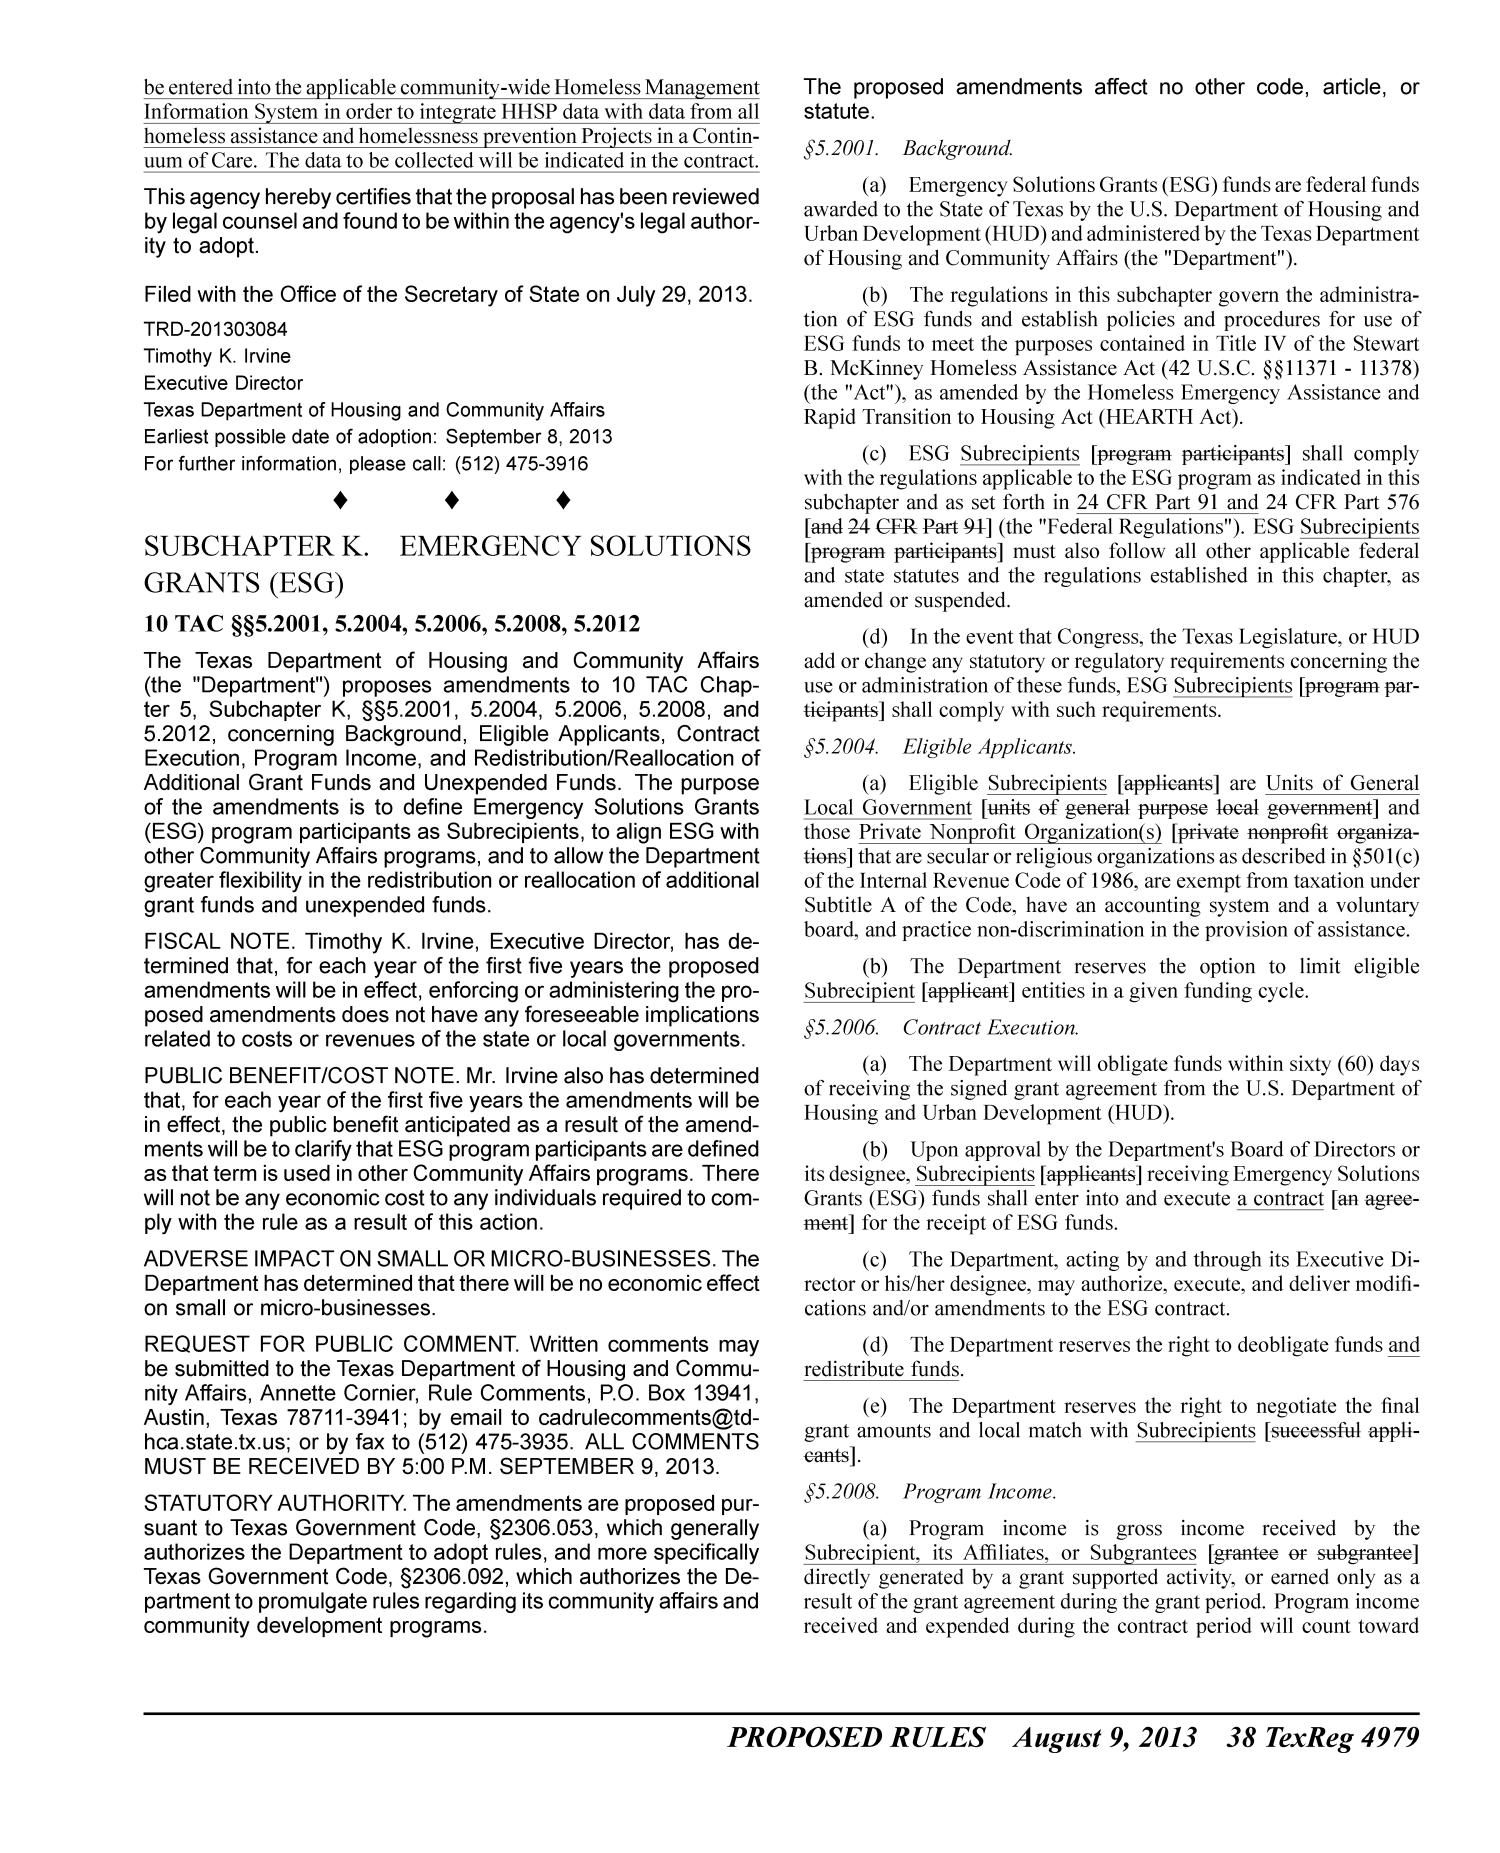 Texas Register, Volume 38, Number 32, Pages 4957-5134, August 9, 2013
                                                
                                                    4979
                                                